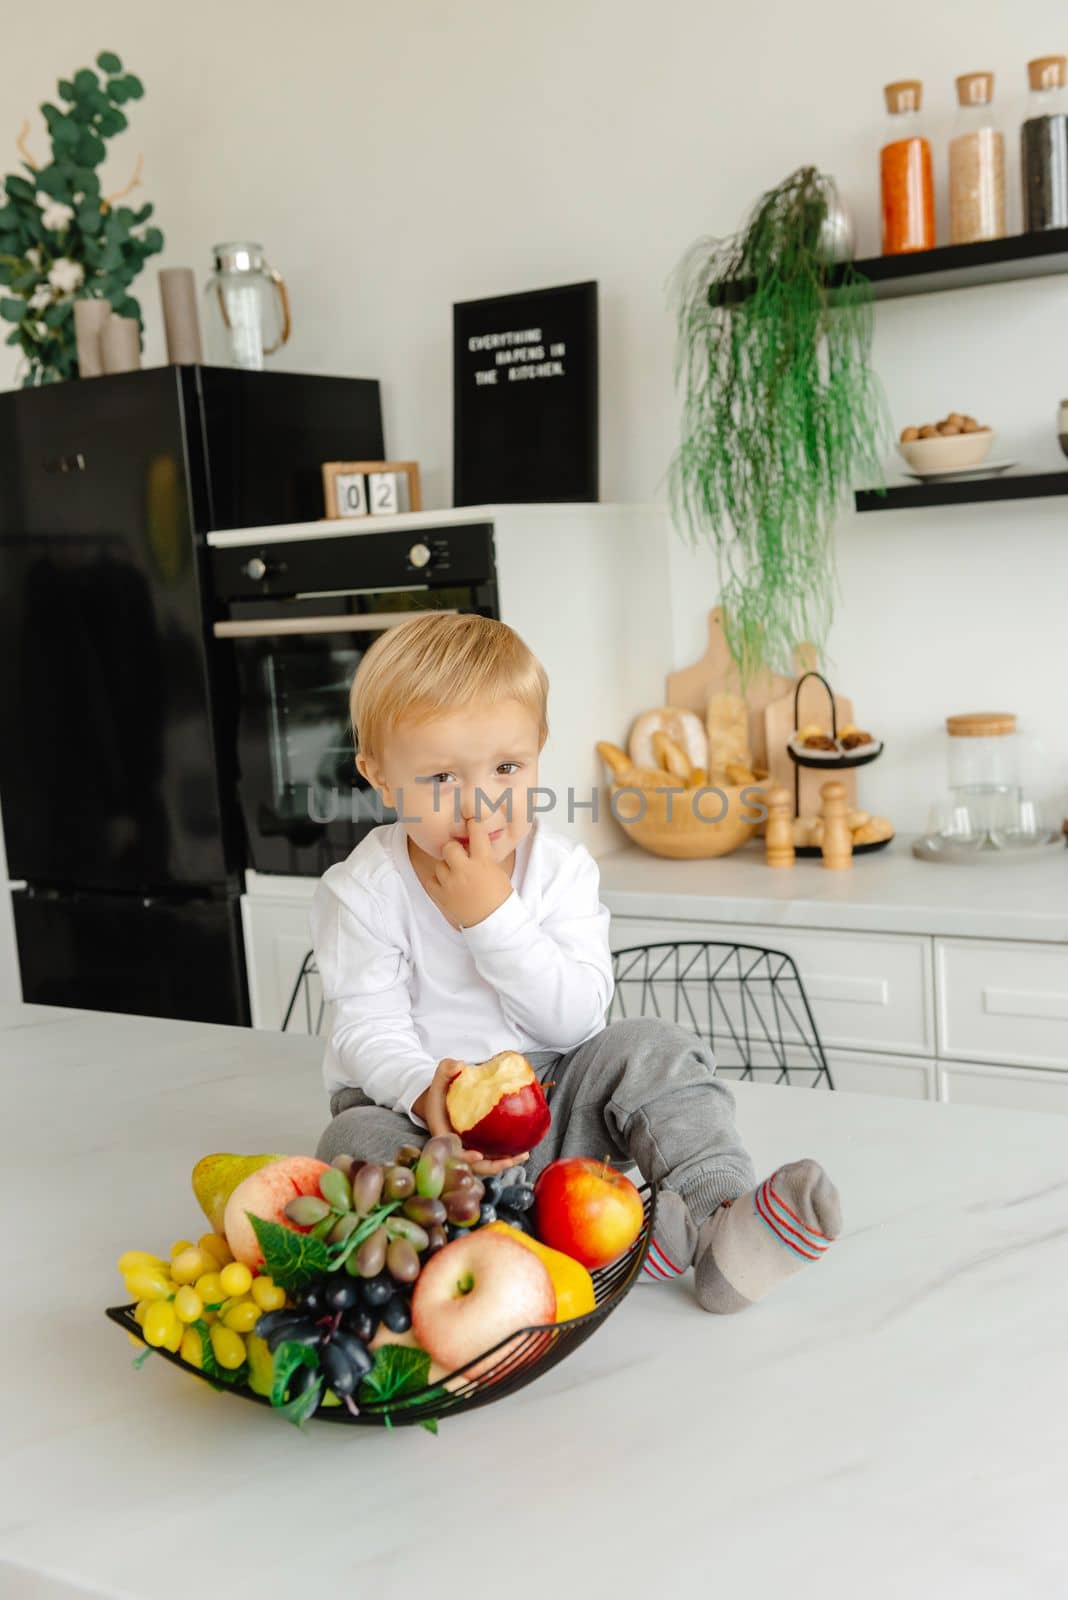 A child picks his nose in the kitchen.